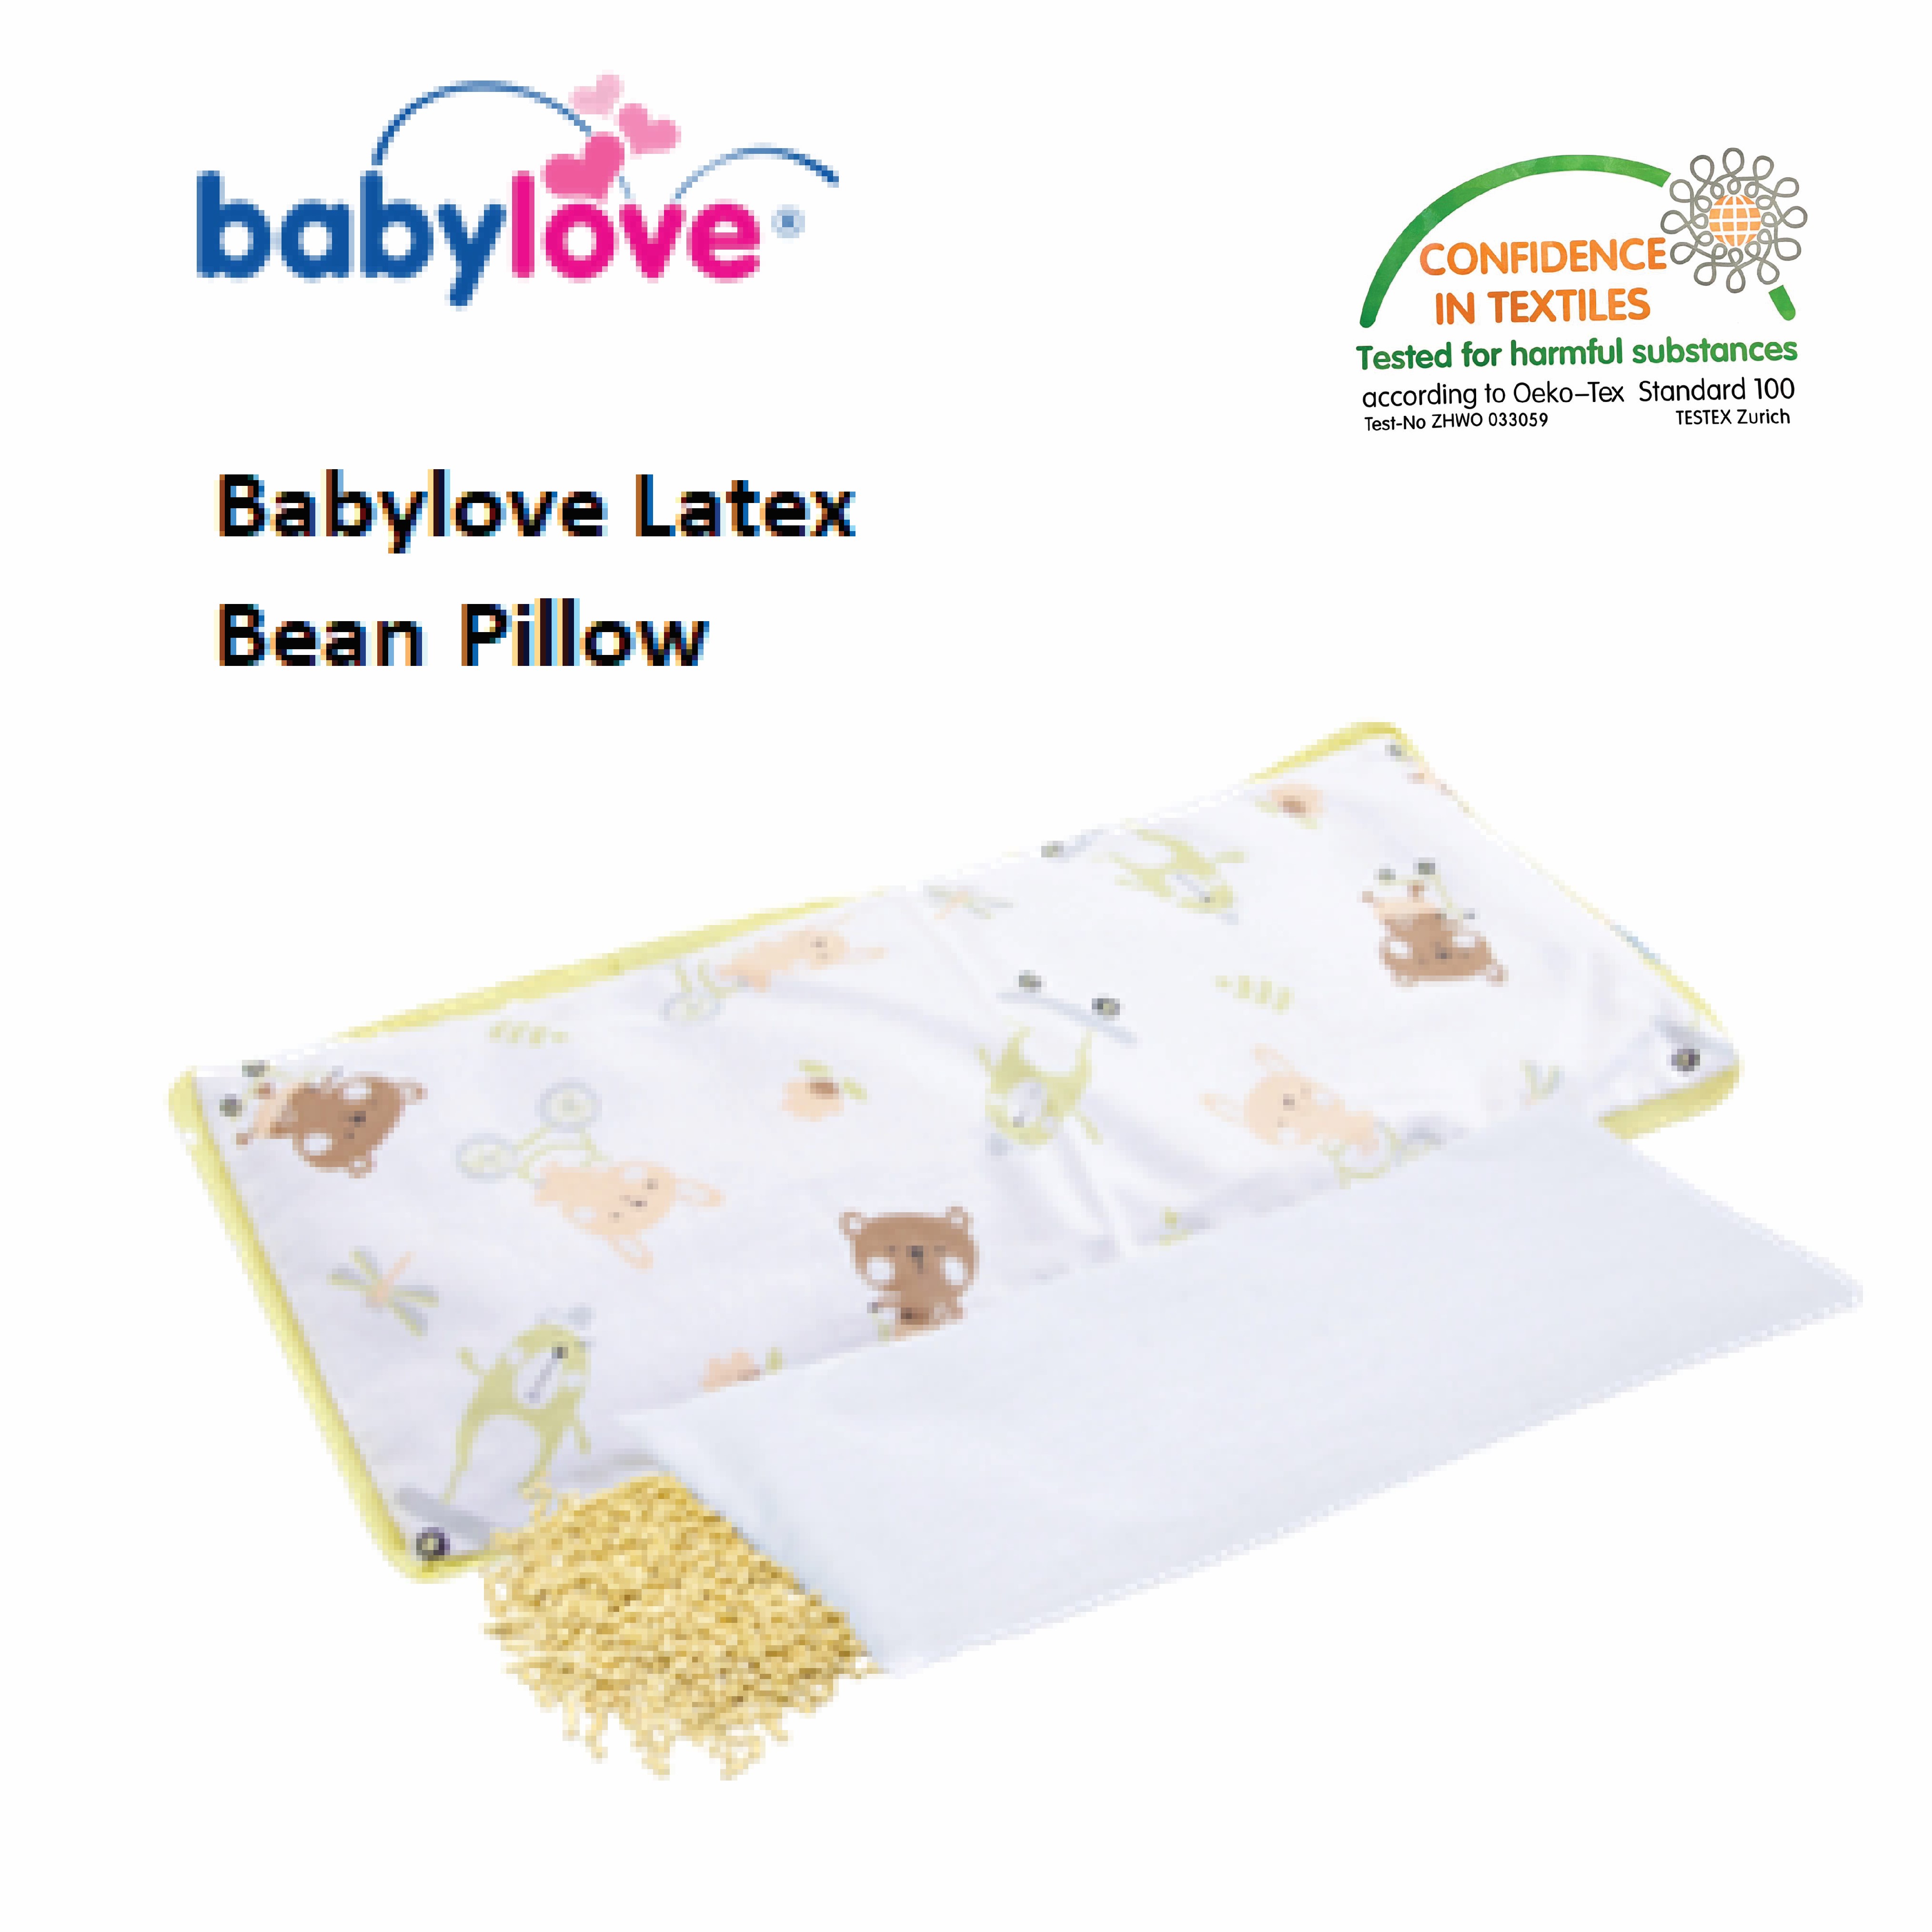 Babylove Latex Bean Pillow with Pillowcase (Assorted designs)